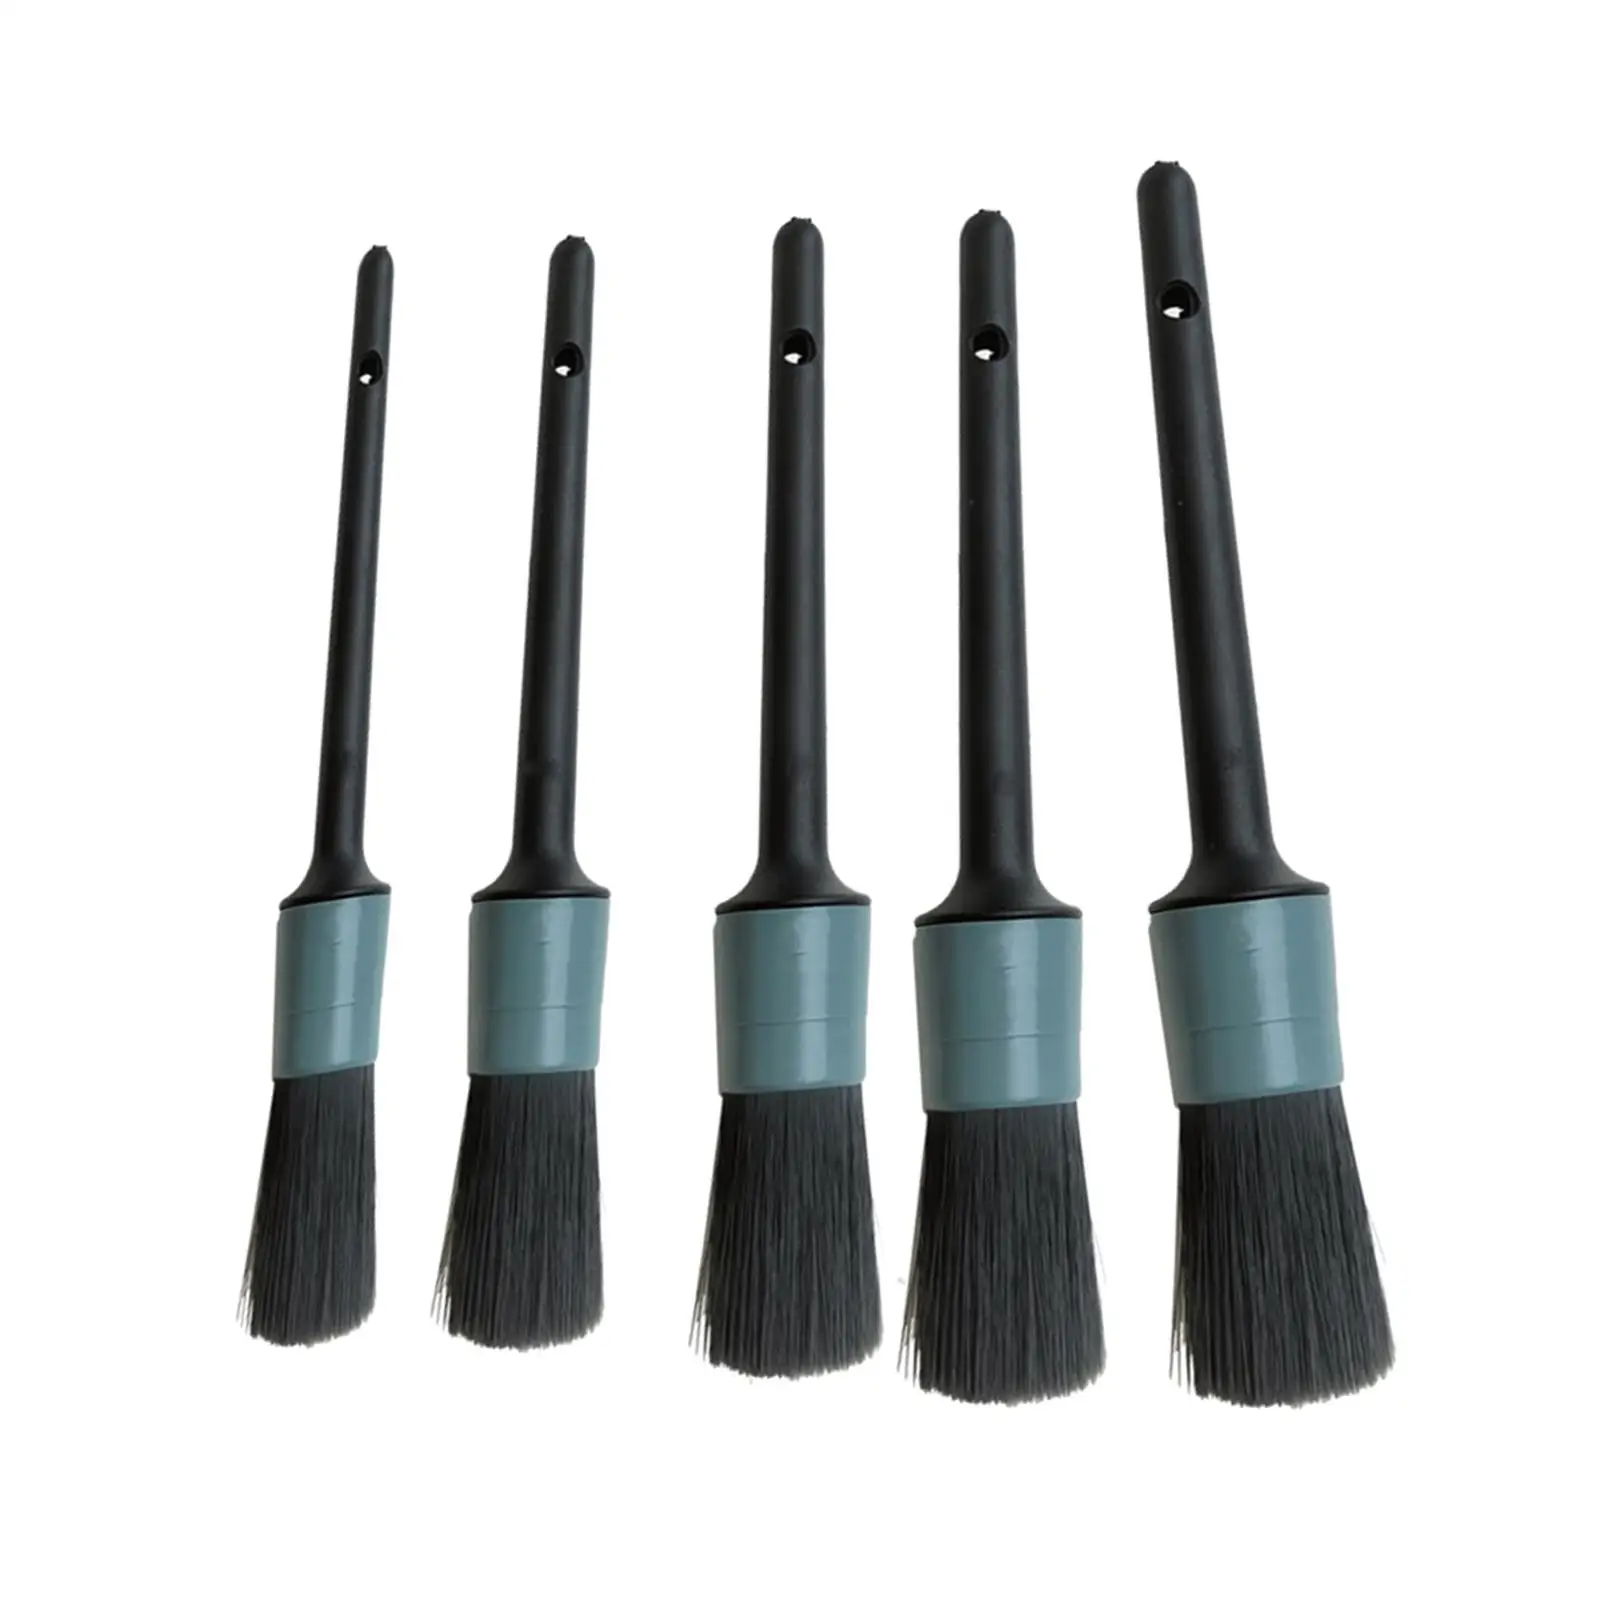 

5 Count Car Detailing Brush Set, Multi Function Soft for Washing Wheels Interior Upholstery Air Vents